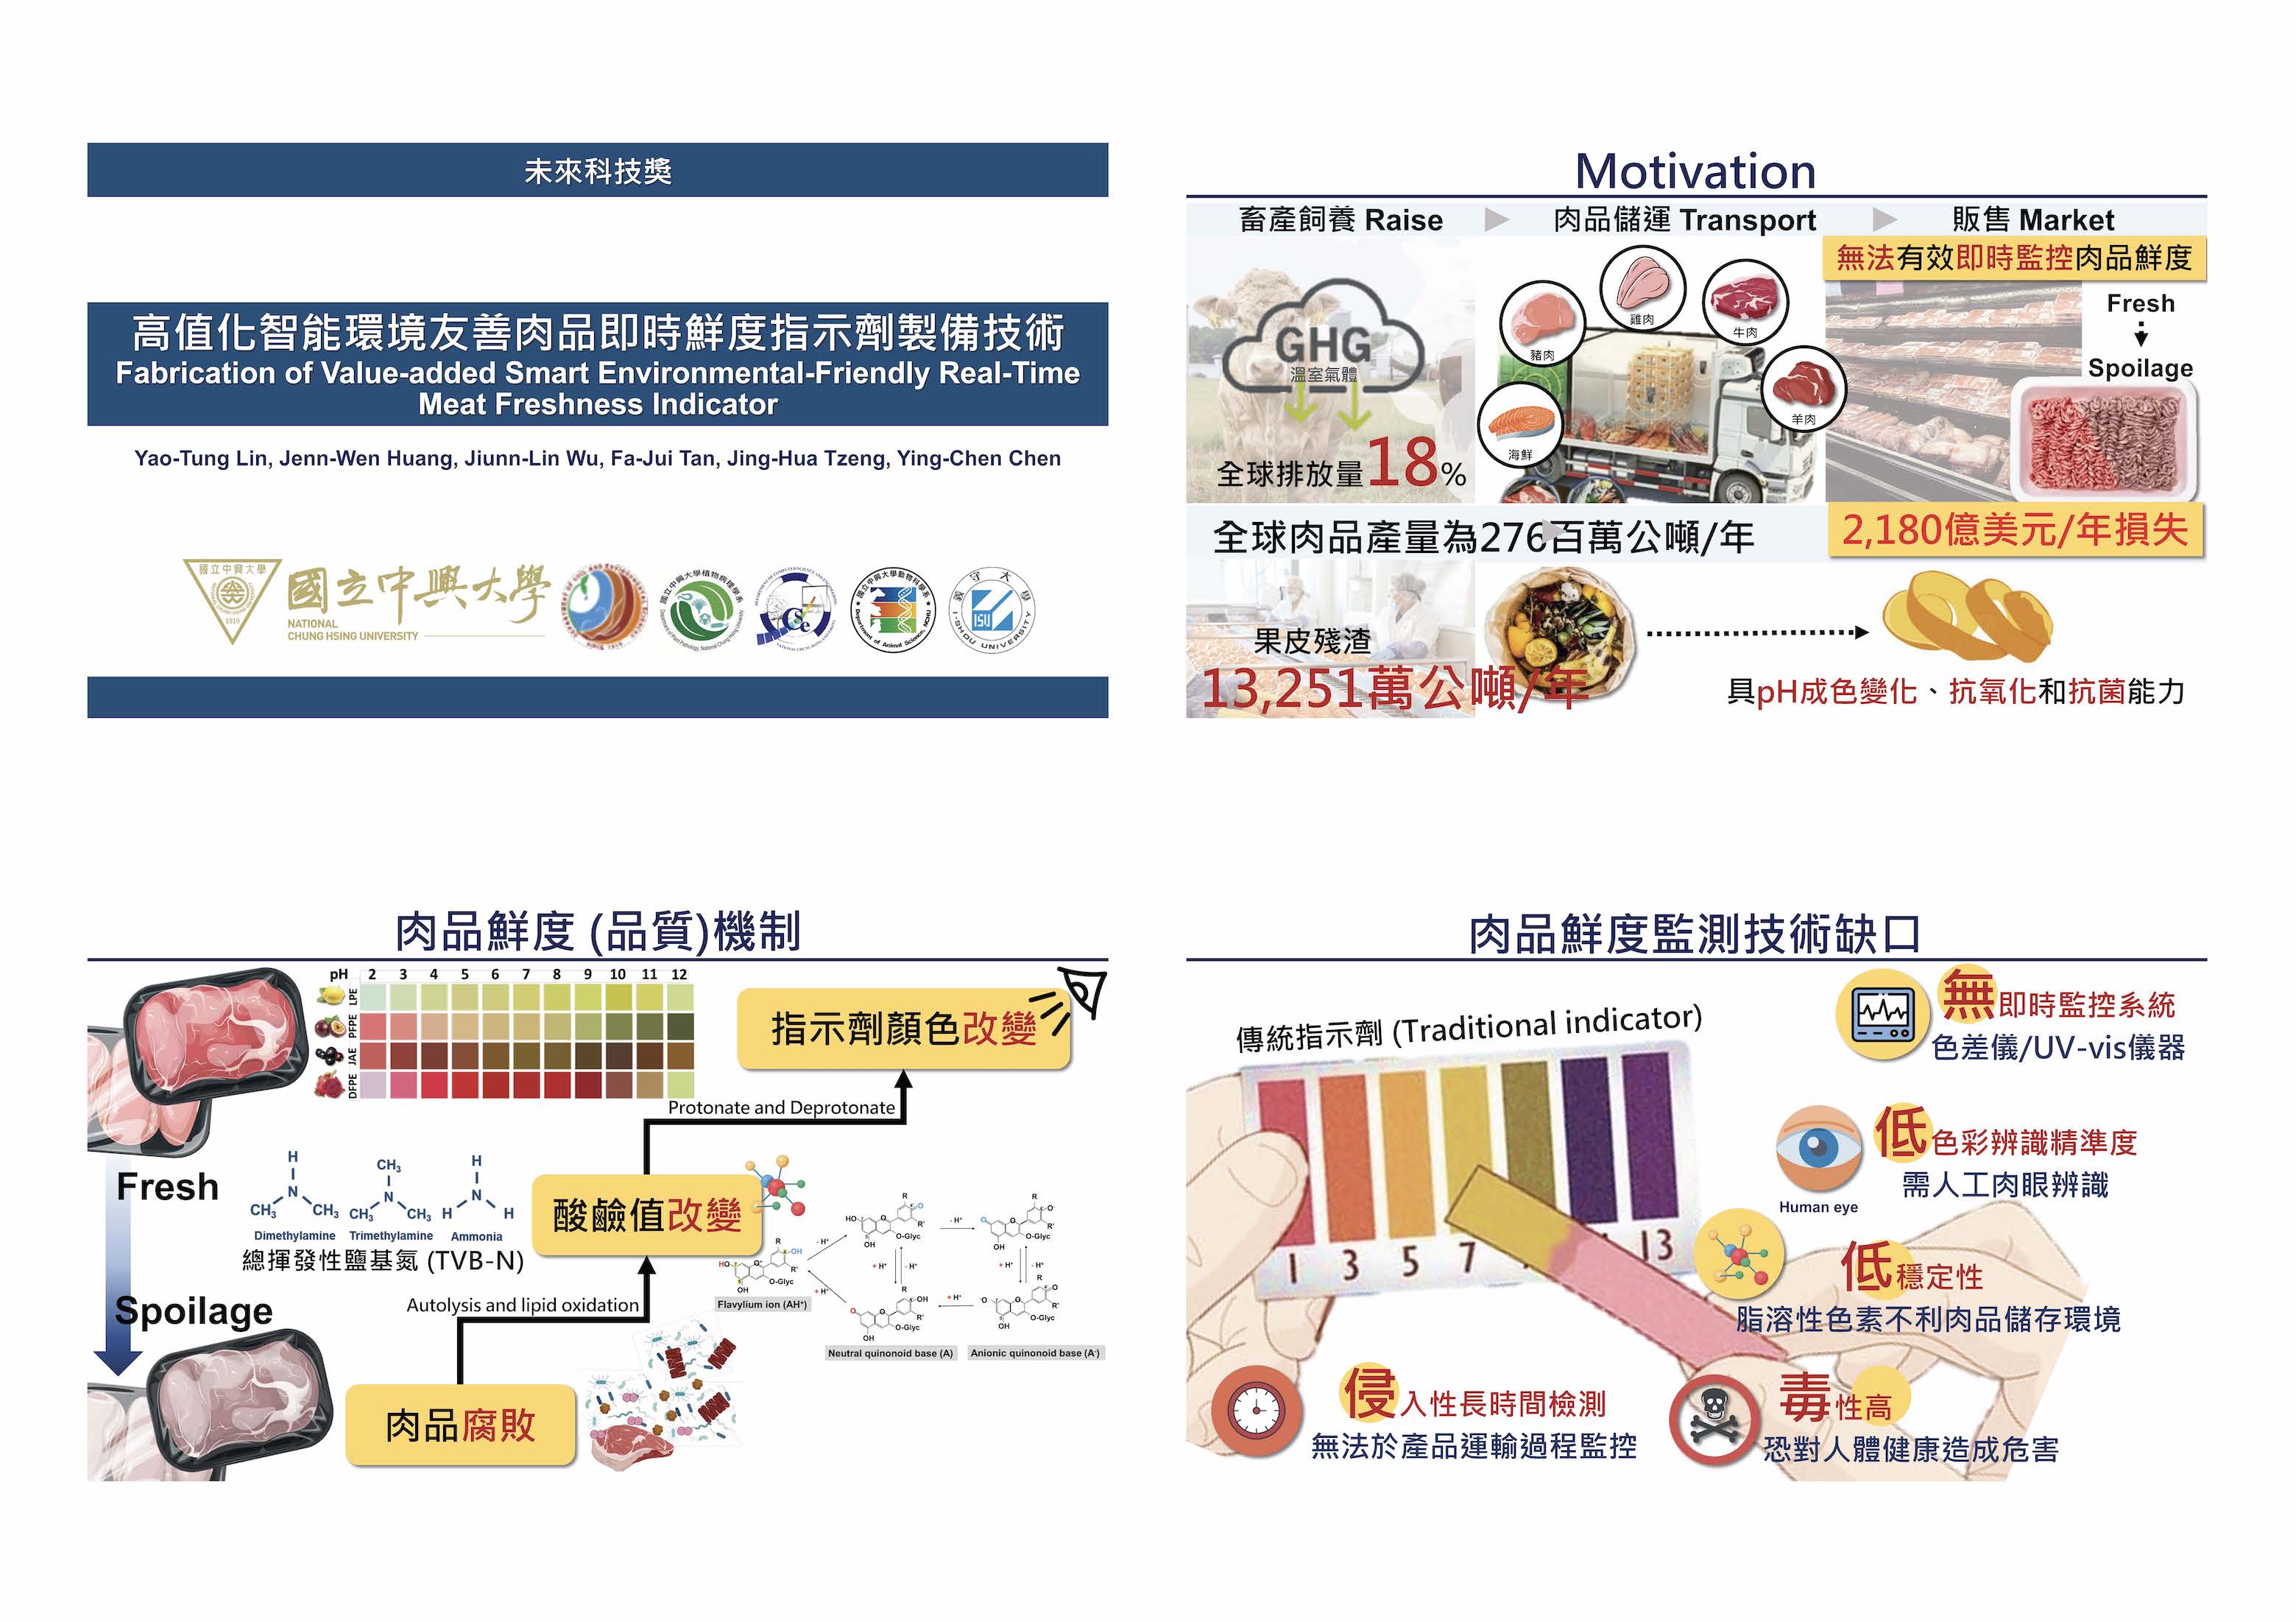 Value-Added Smart Environmental-Friendly Real-Time Meat Freshness Indicator for Meat Products- Value-Added Technology of Agricultural Waste